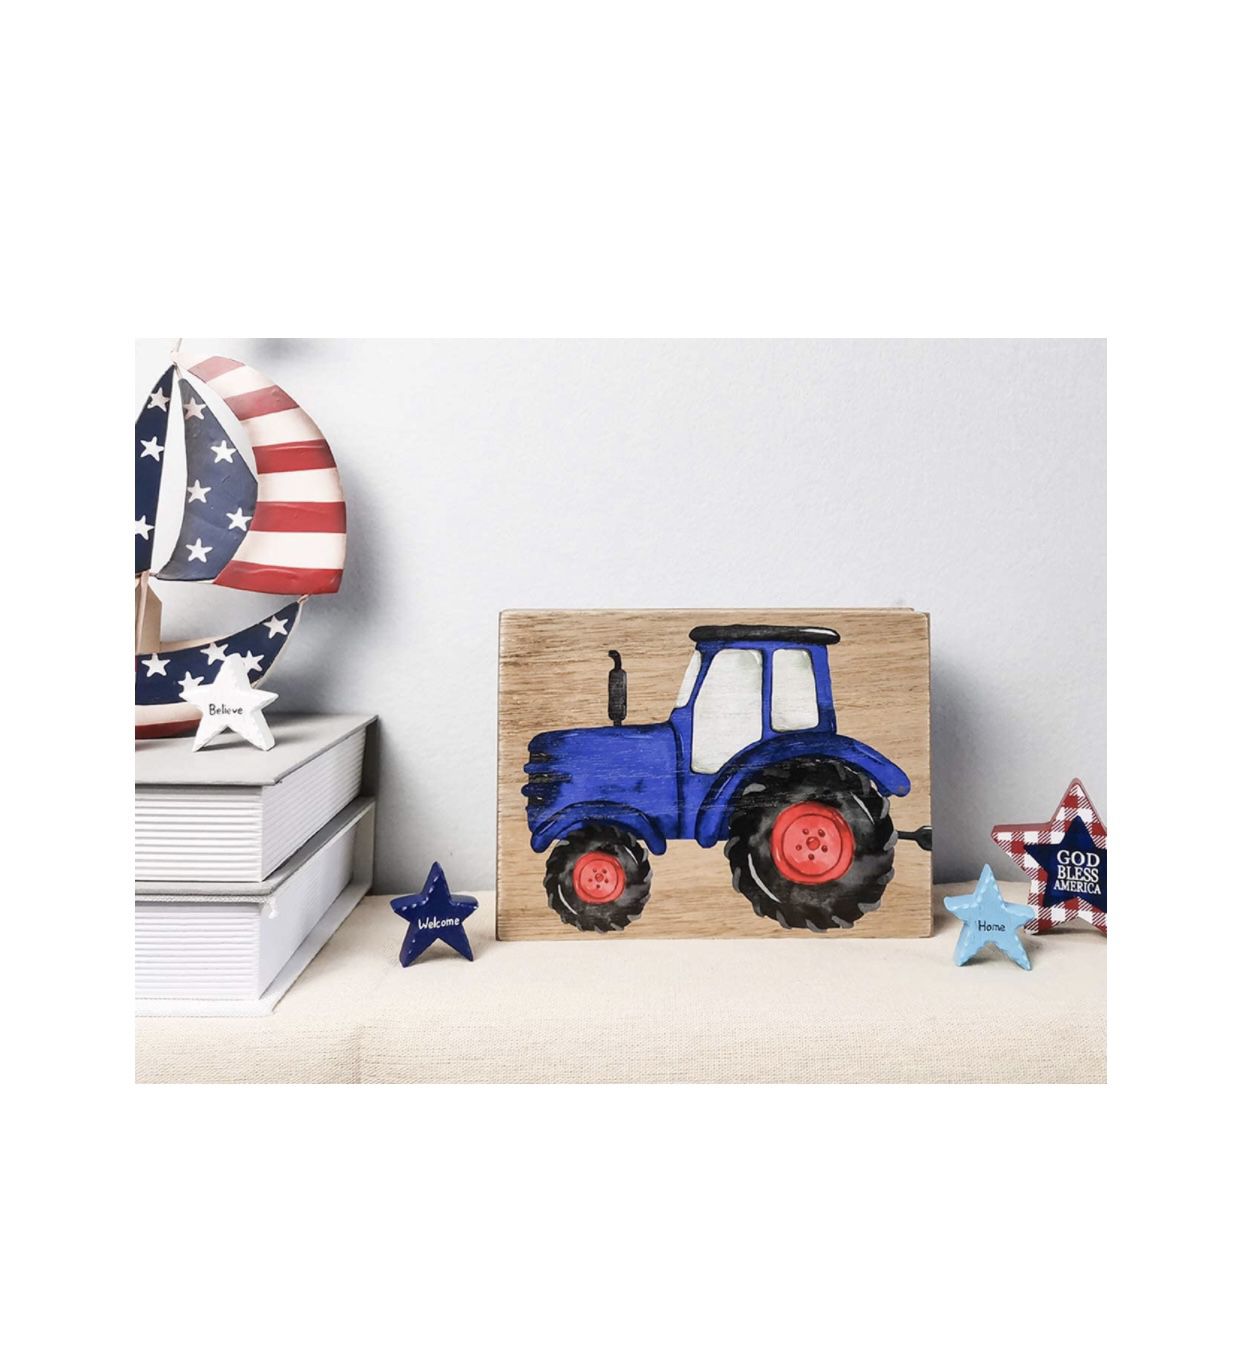 Rustic Home Sign Farmhouse Interchangeable Holiday Spring Summer Desk Table Decor-Seasonal Reversible Happy Easter/God Bless America 4th of July Woode